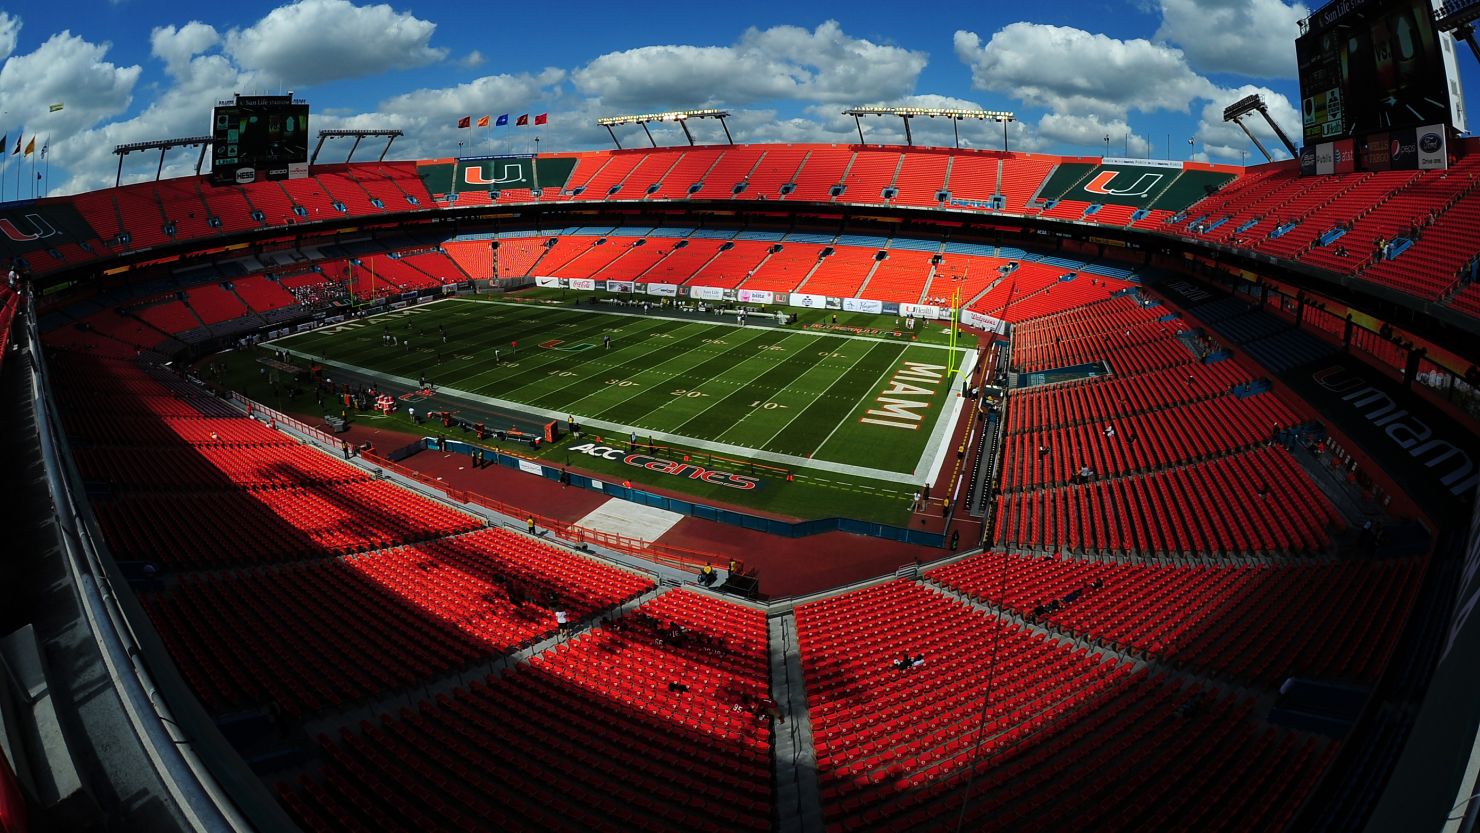 The University of Miami Hurricanes play their home games at Sun Life Stadium. A booster has admitted violating NCAA rules.